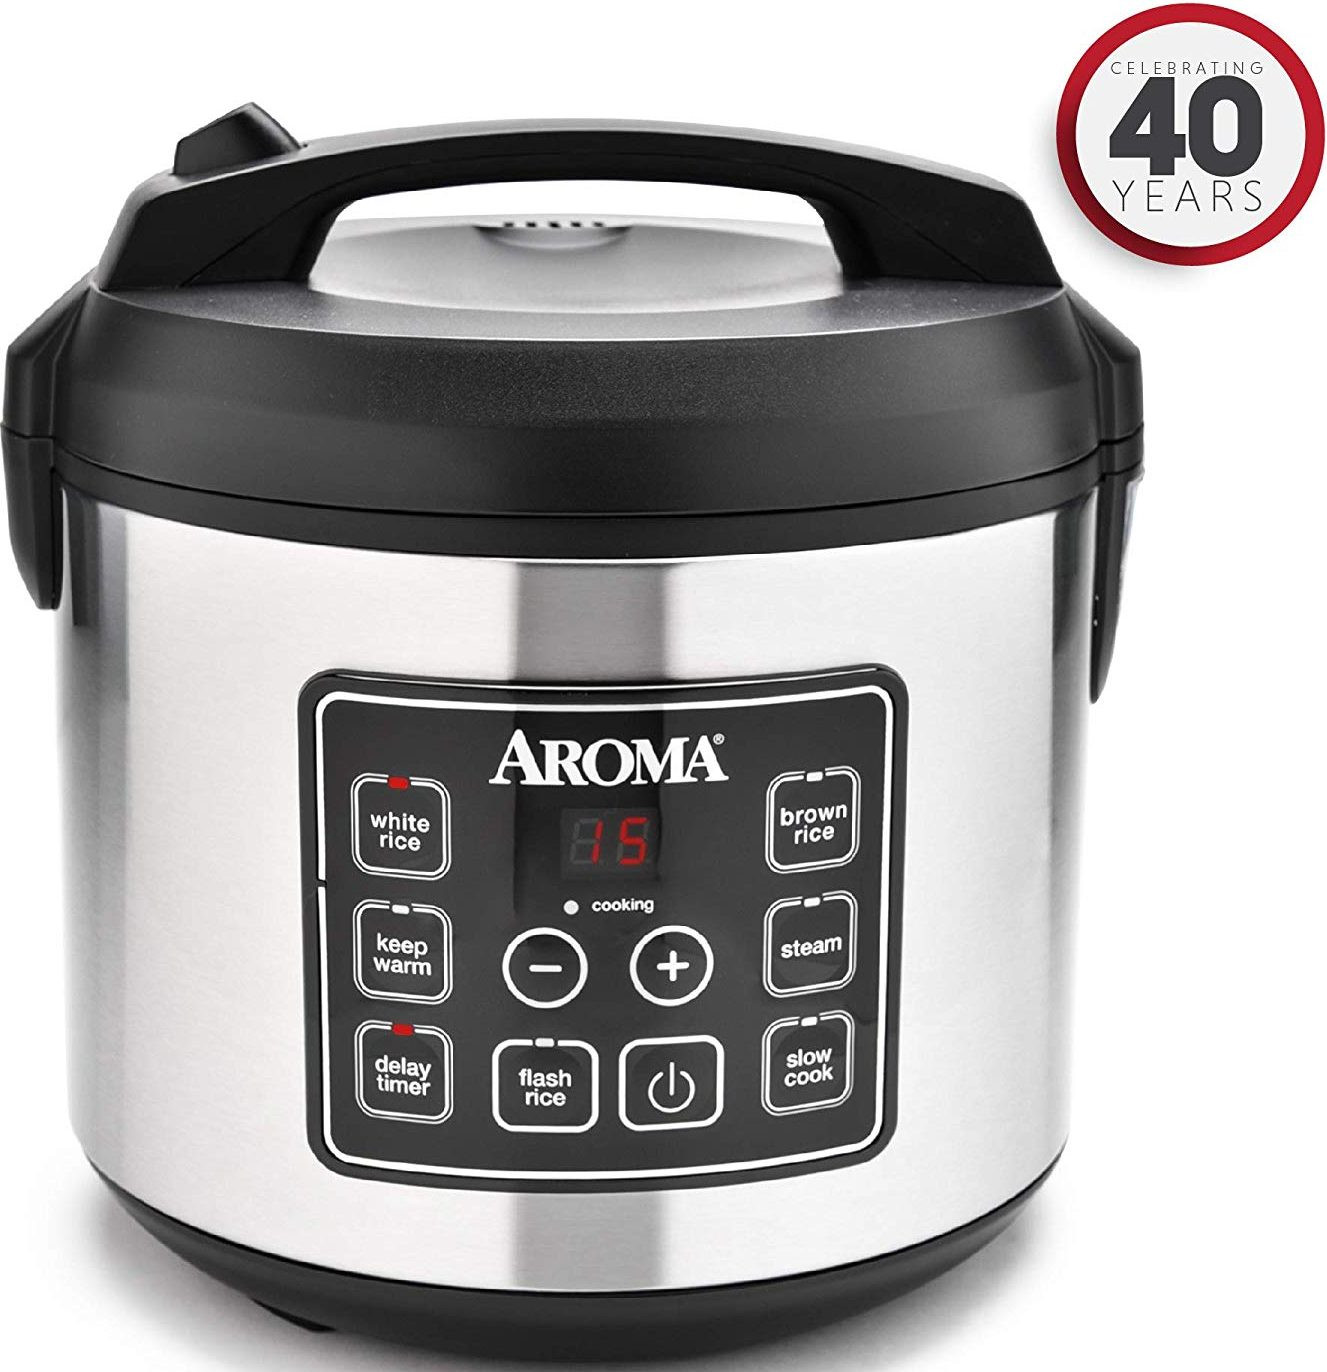 Brown Rice In Rice Cooker
 Top 10 Best Brown Rice Cookers in 2020 Grab e Now